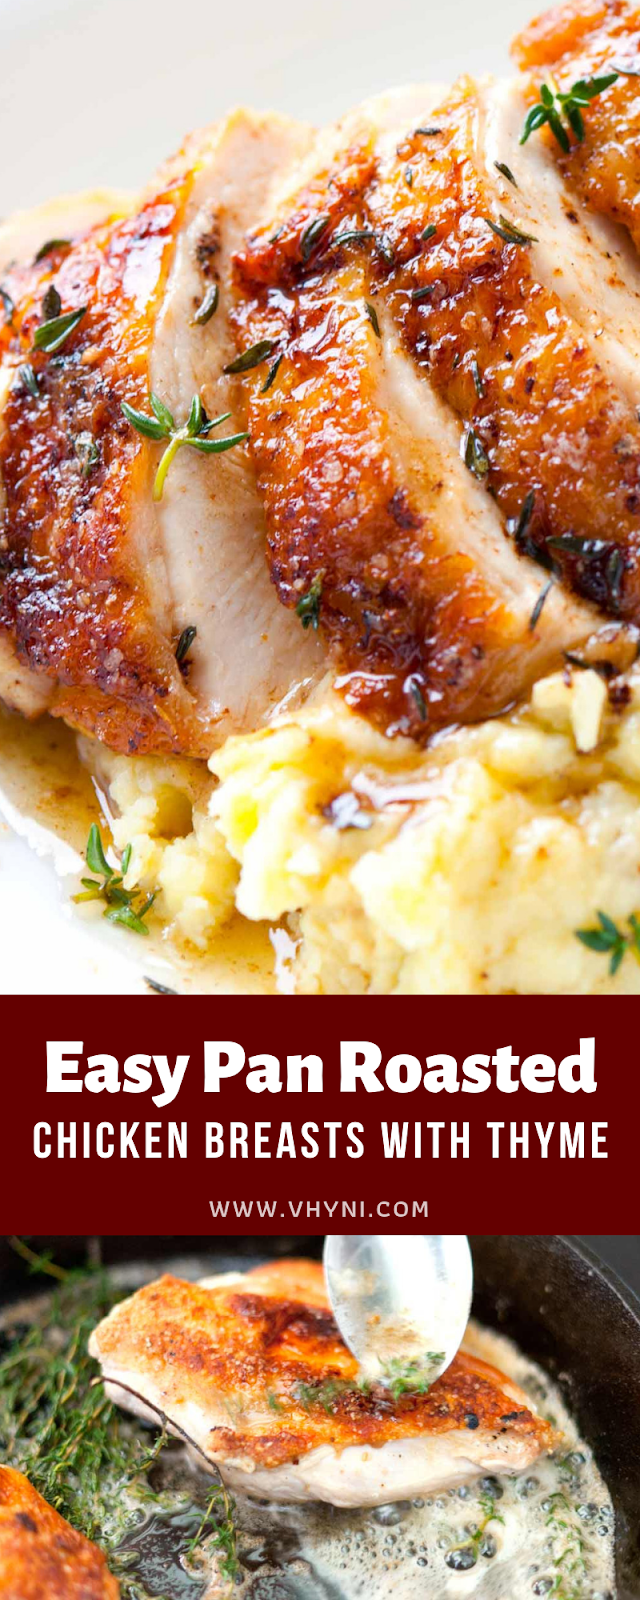 Easy Pan Roasted Chicken Breasts with Thyme | Jessie's Food ... - 